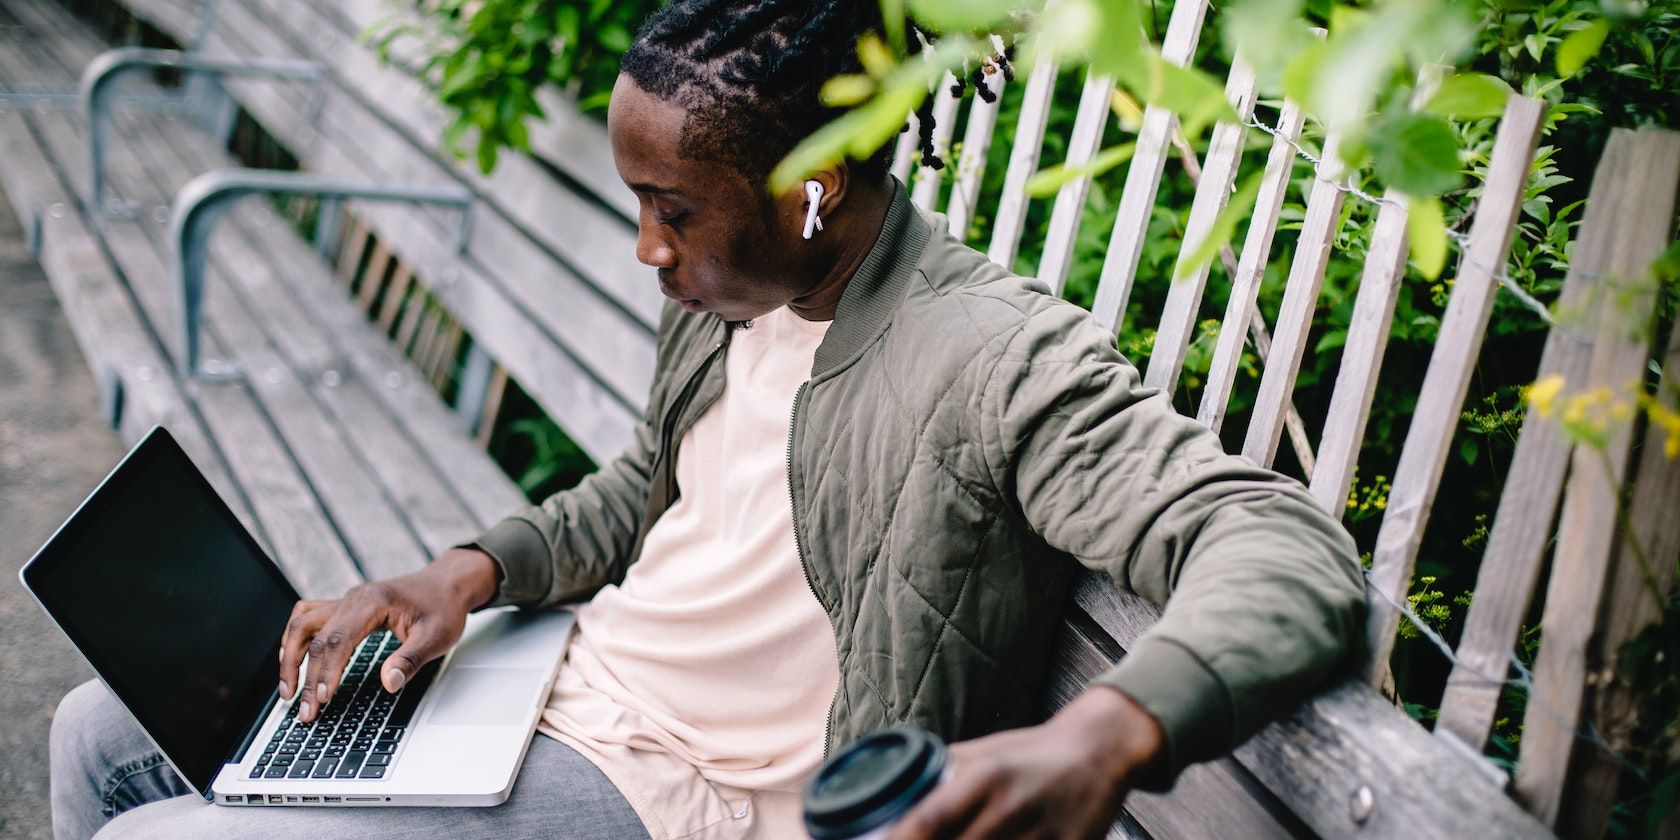 man wearing earbuds listens to music with laptop